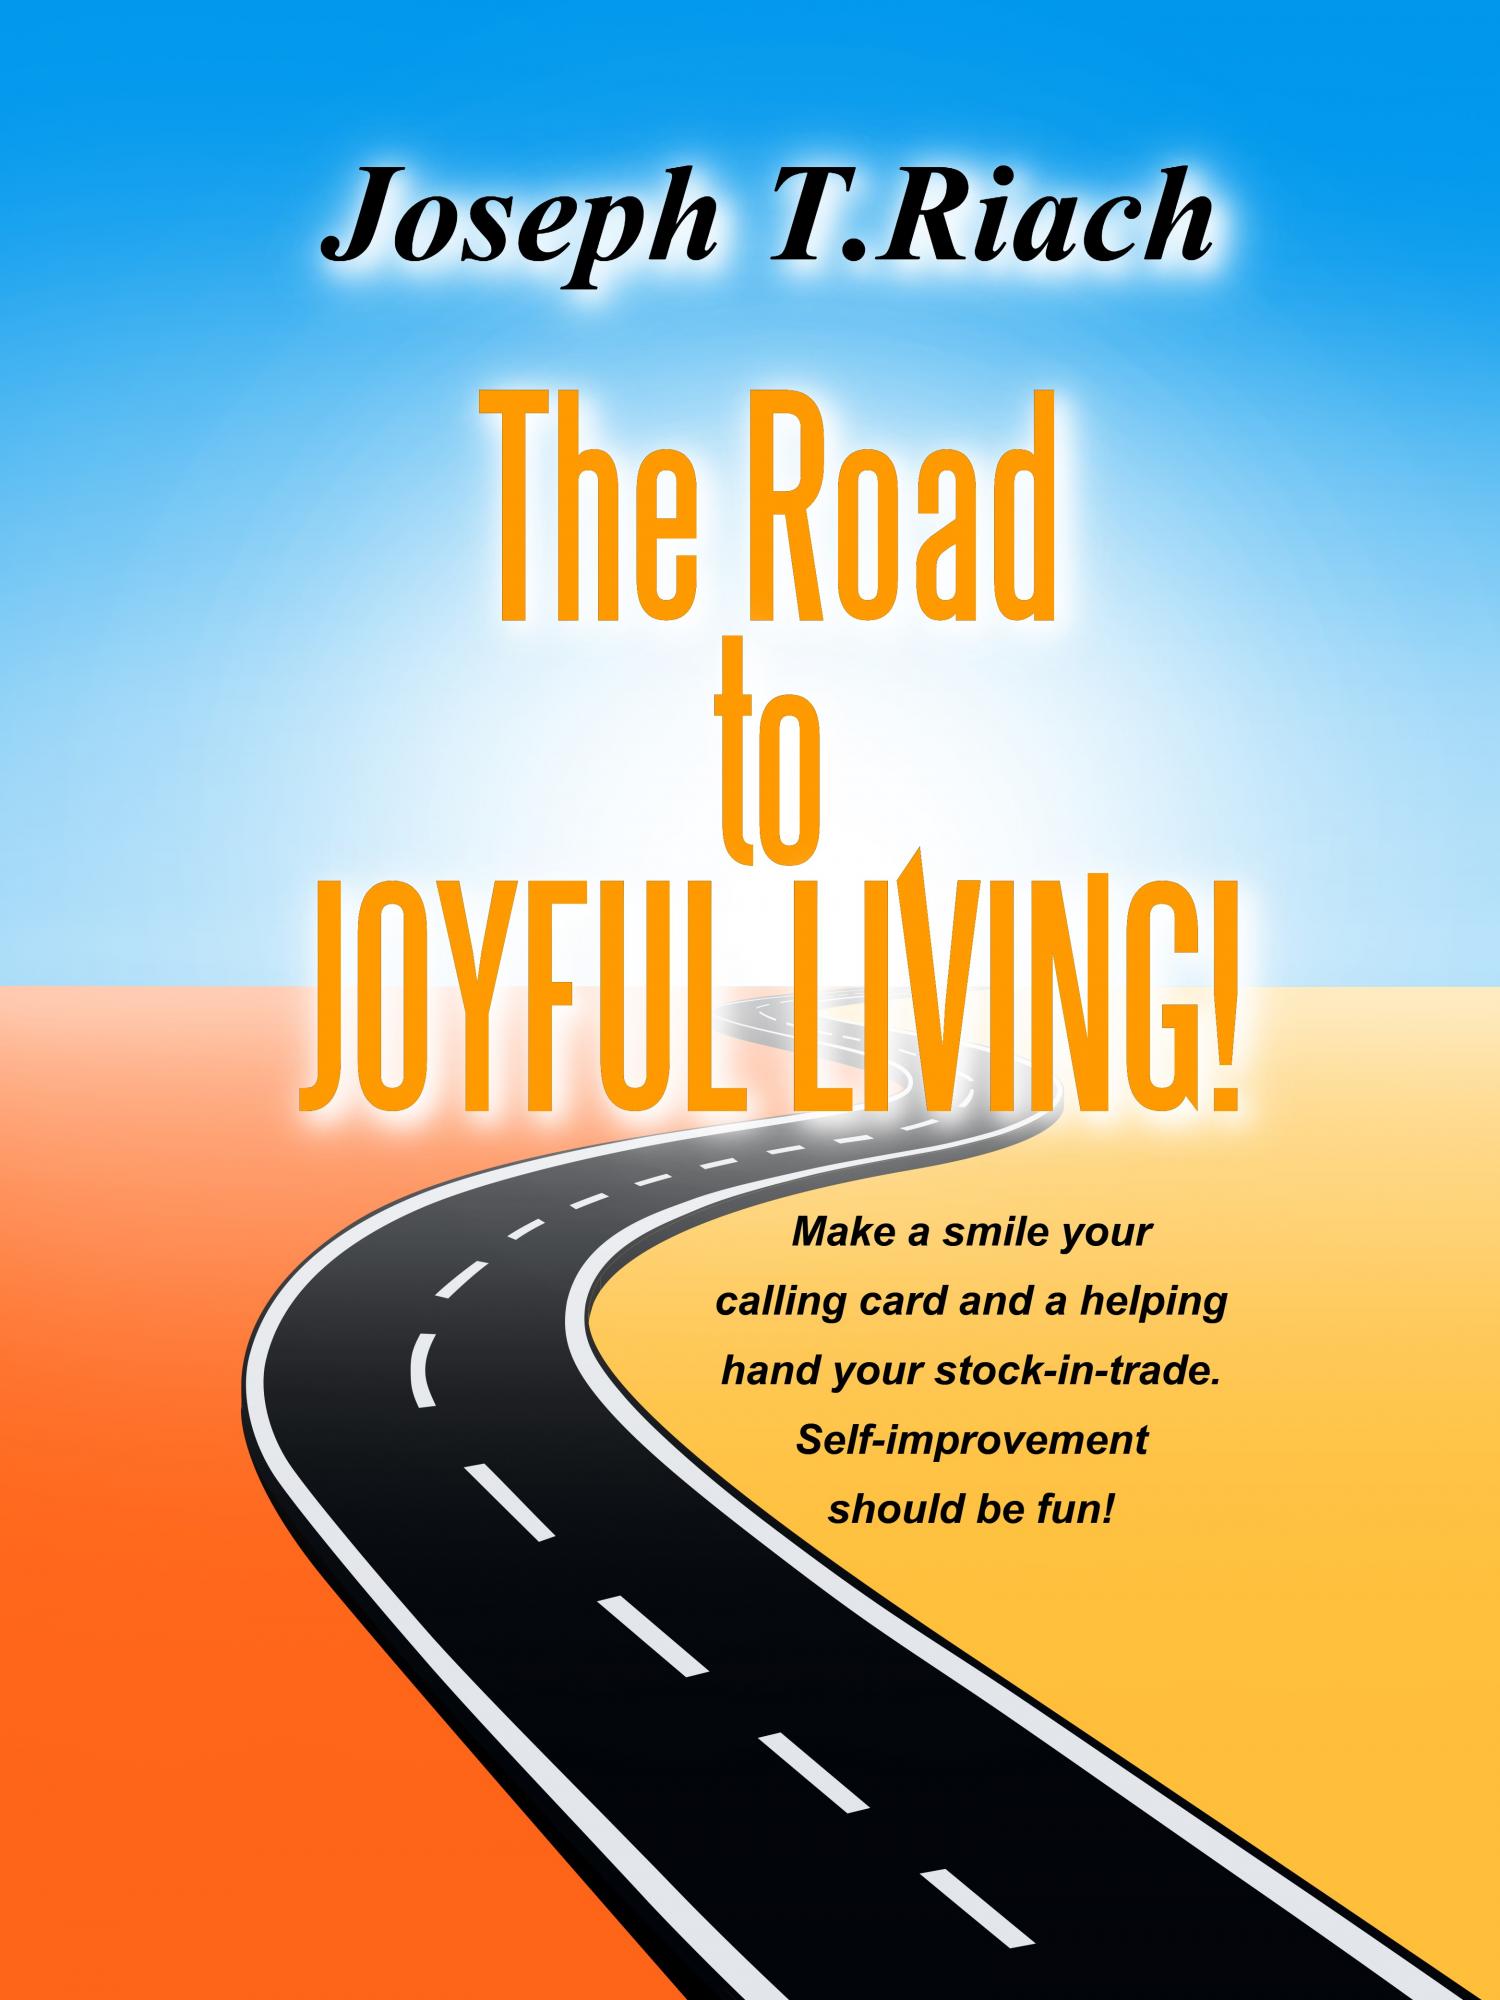 Self-Improvement Should Be Fun!
	- successful lifestyle paperback and ebook written by Joseph Tom Riach